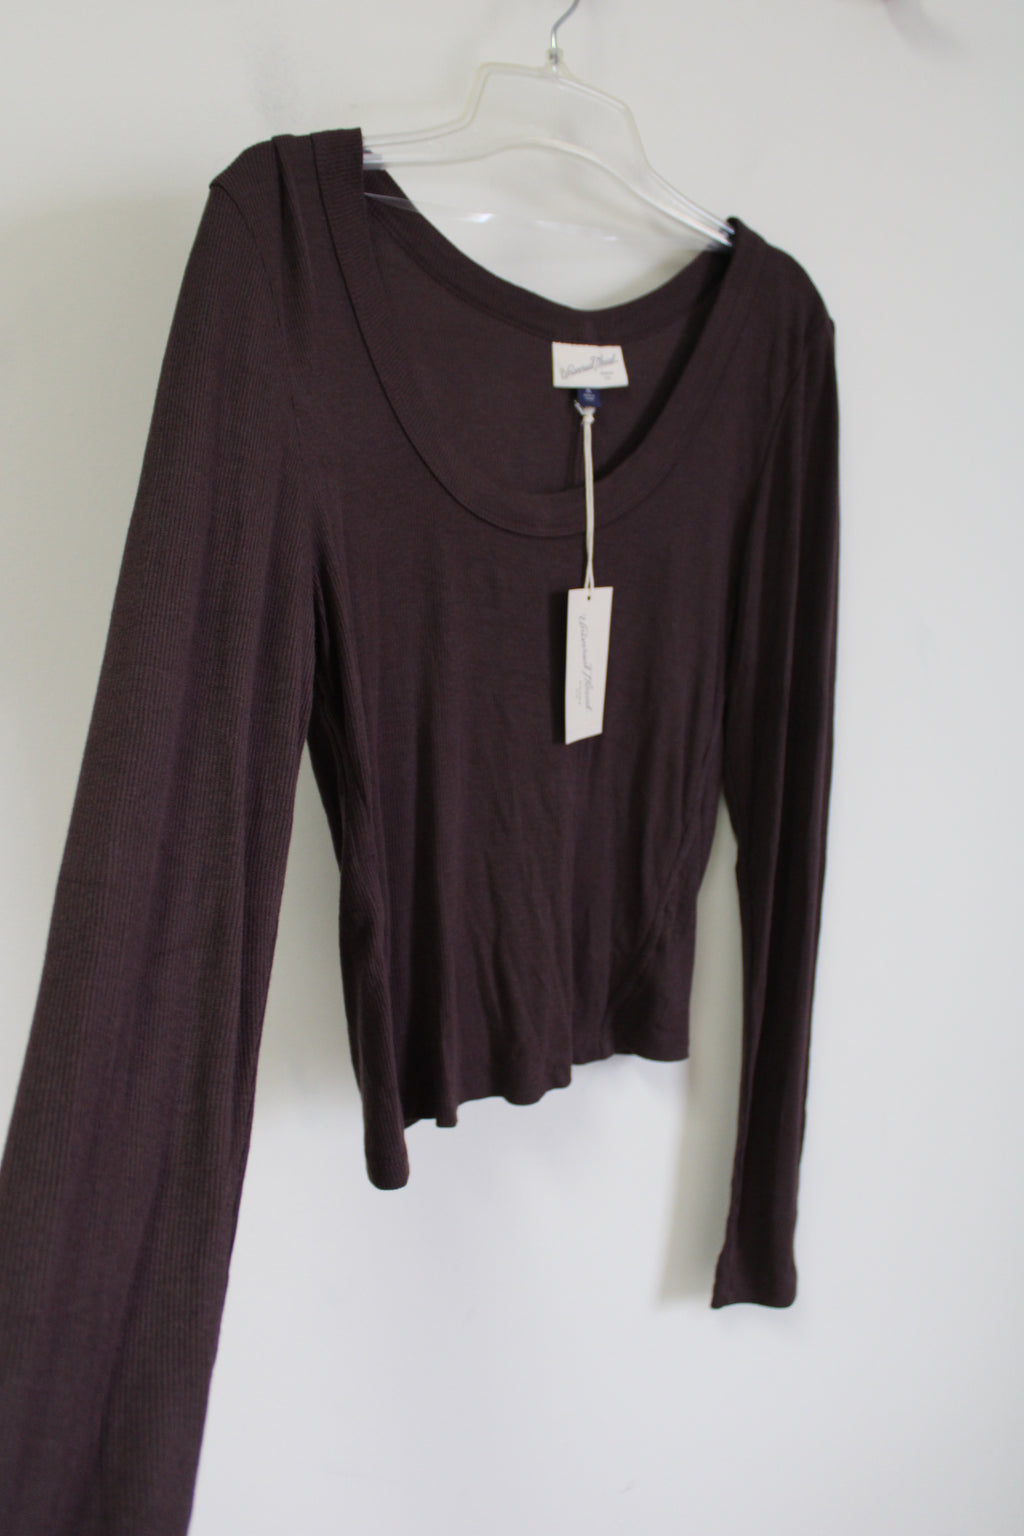 NEW Universal Threads Brown Rib Long Sleeved Scoopneck Top | XL